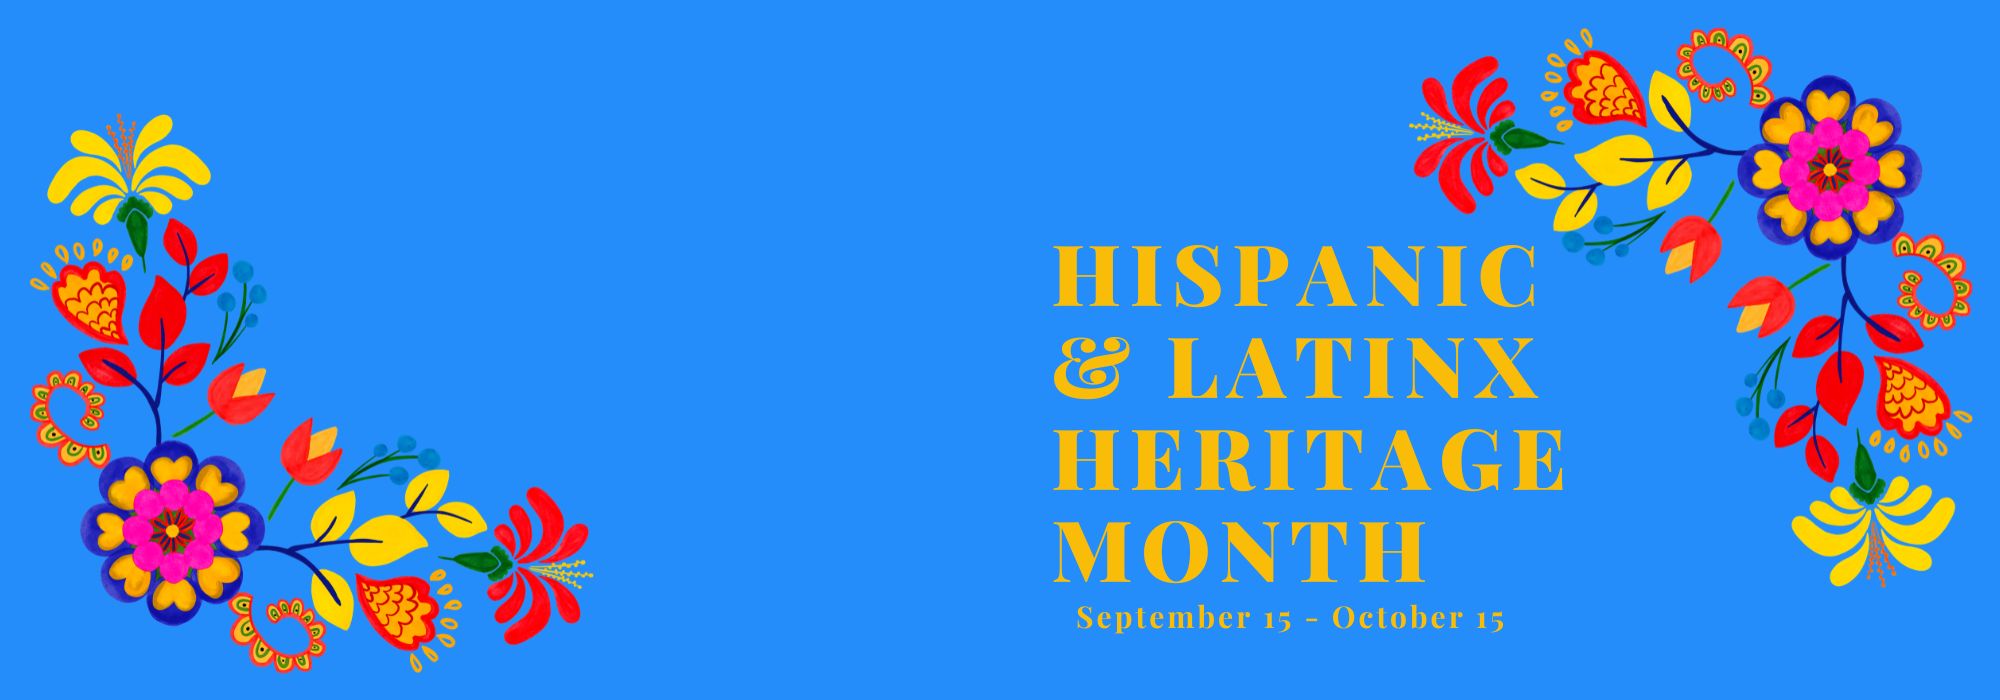 Hispanic & Latinx Heritage Month September 15 through October 15 Blue background with colorful flowers